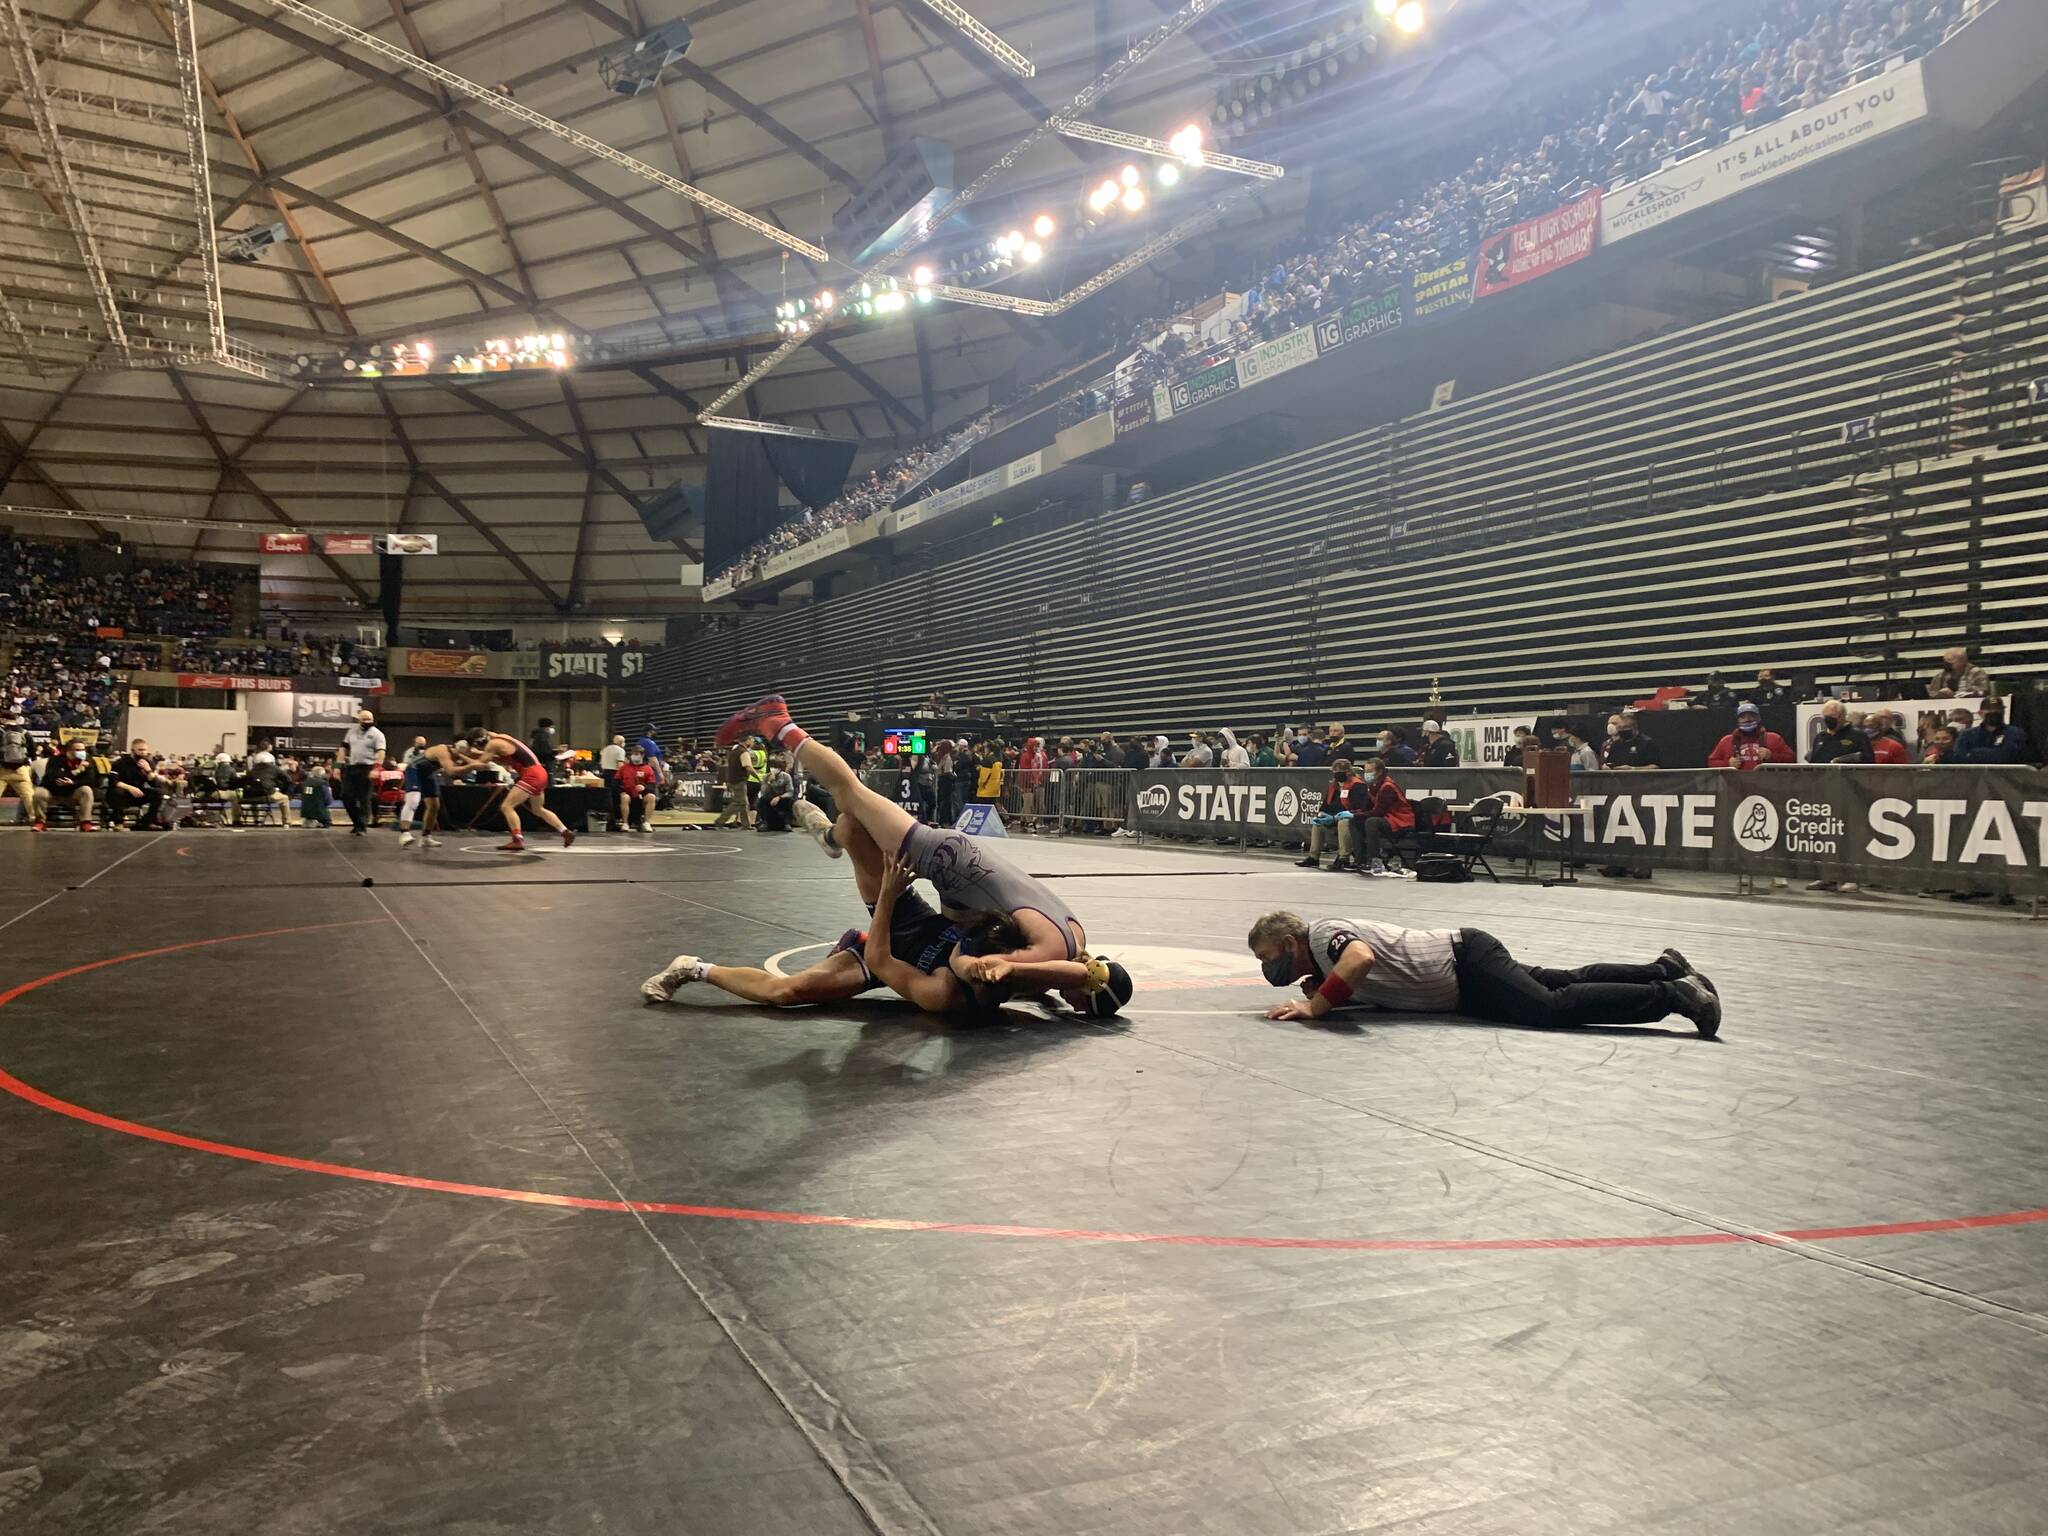 Photo provided
Percie Hatfield wrestles at the state tournament.